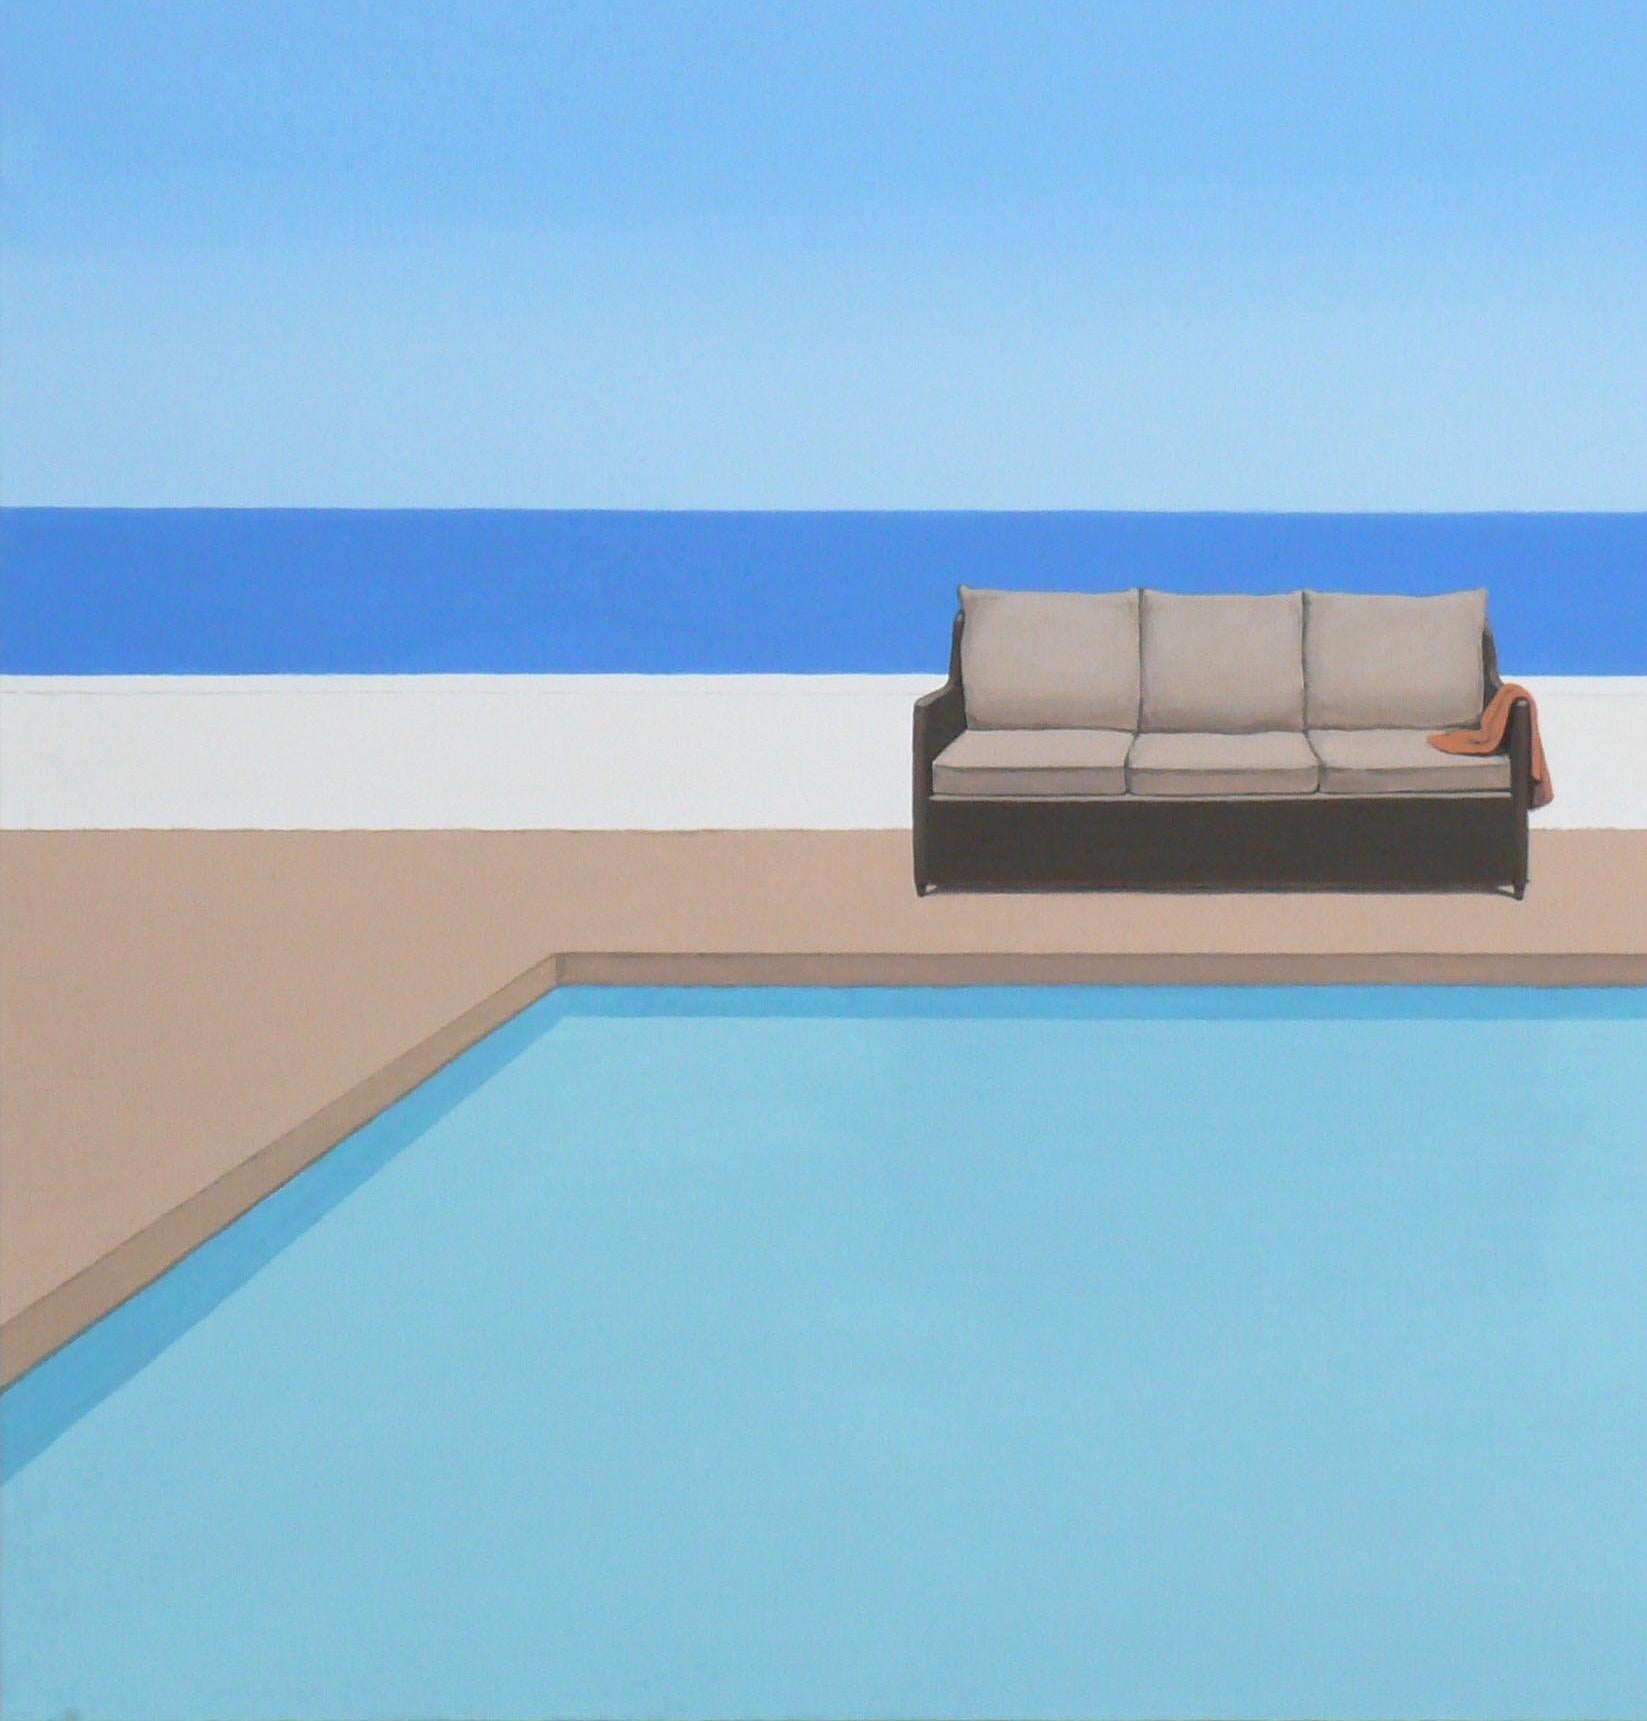 Pool by the ocean - landscape painting - Painting by Magdalena Laskowska